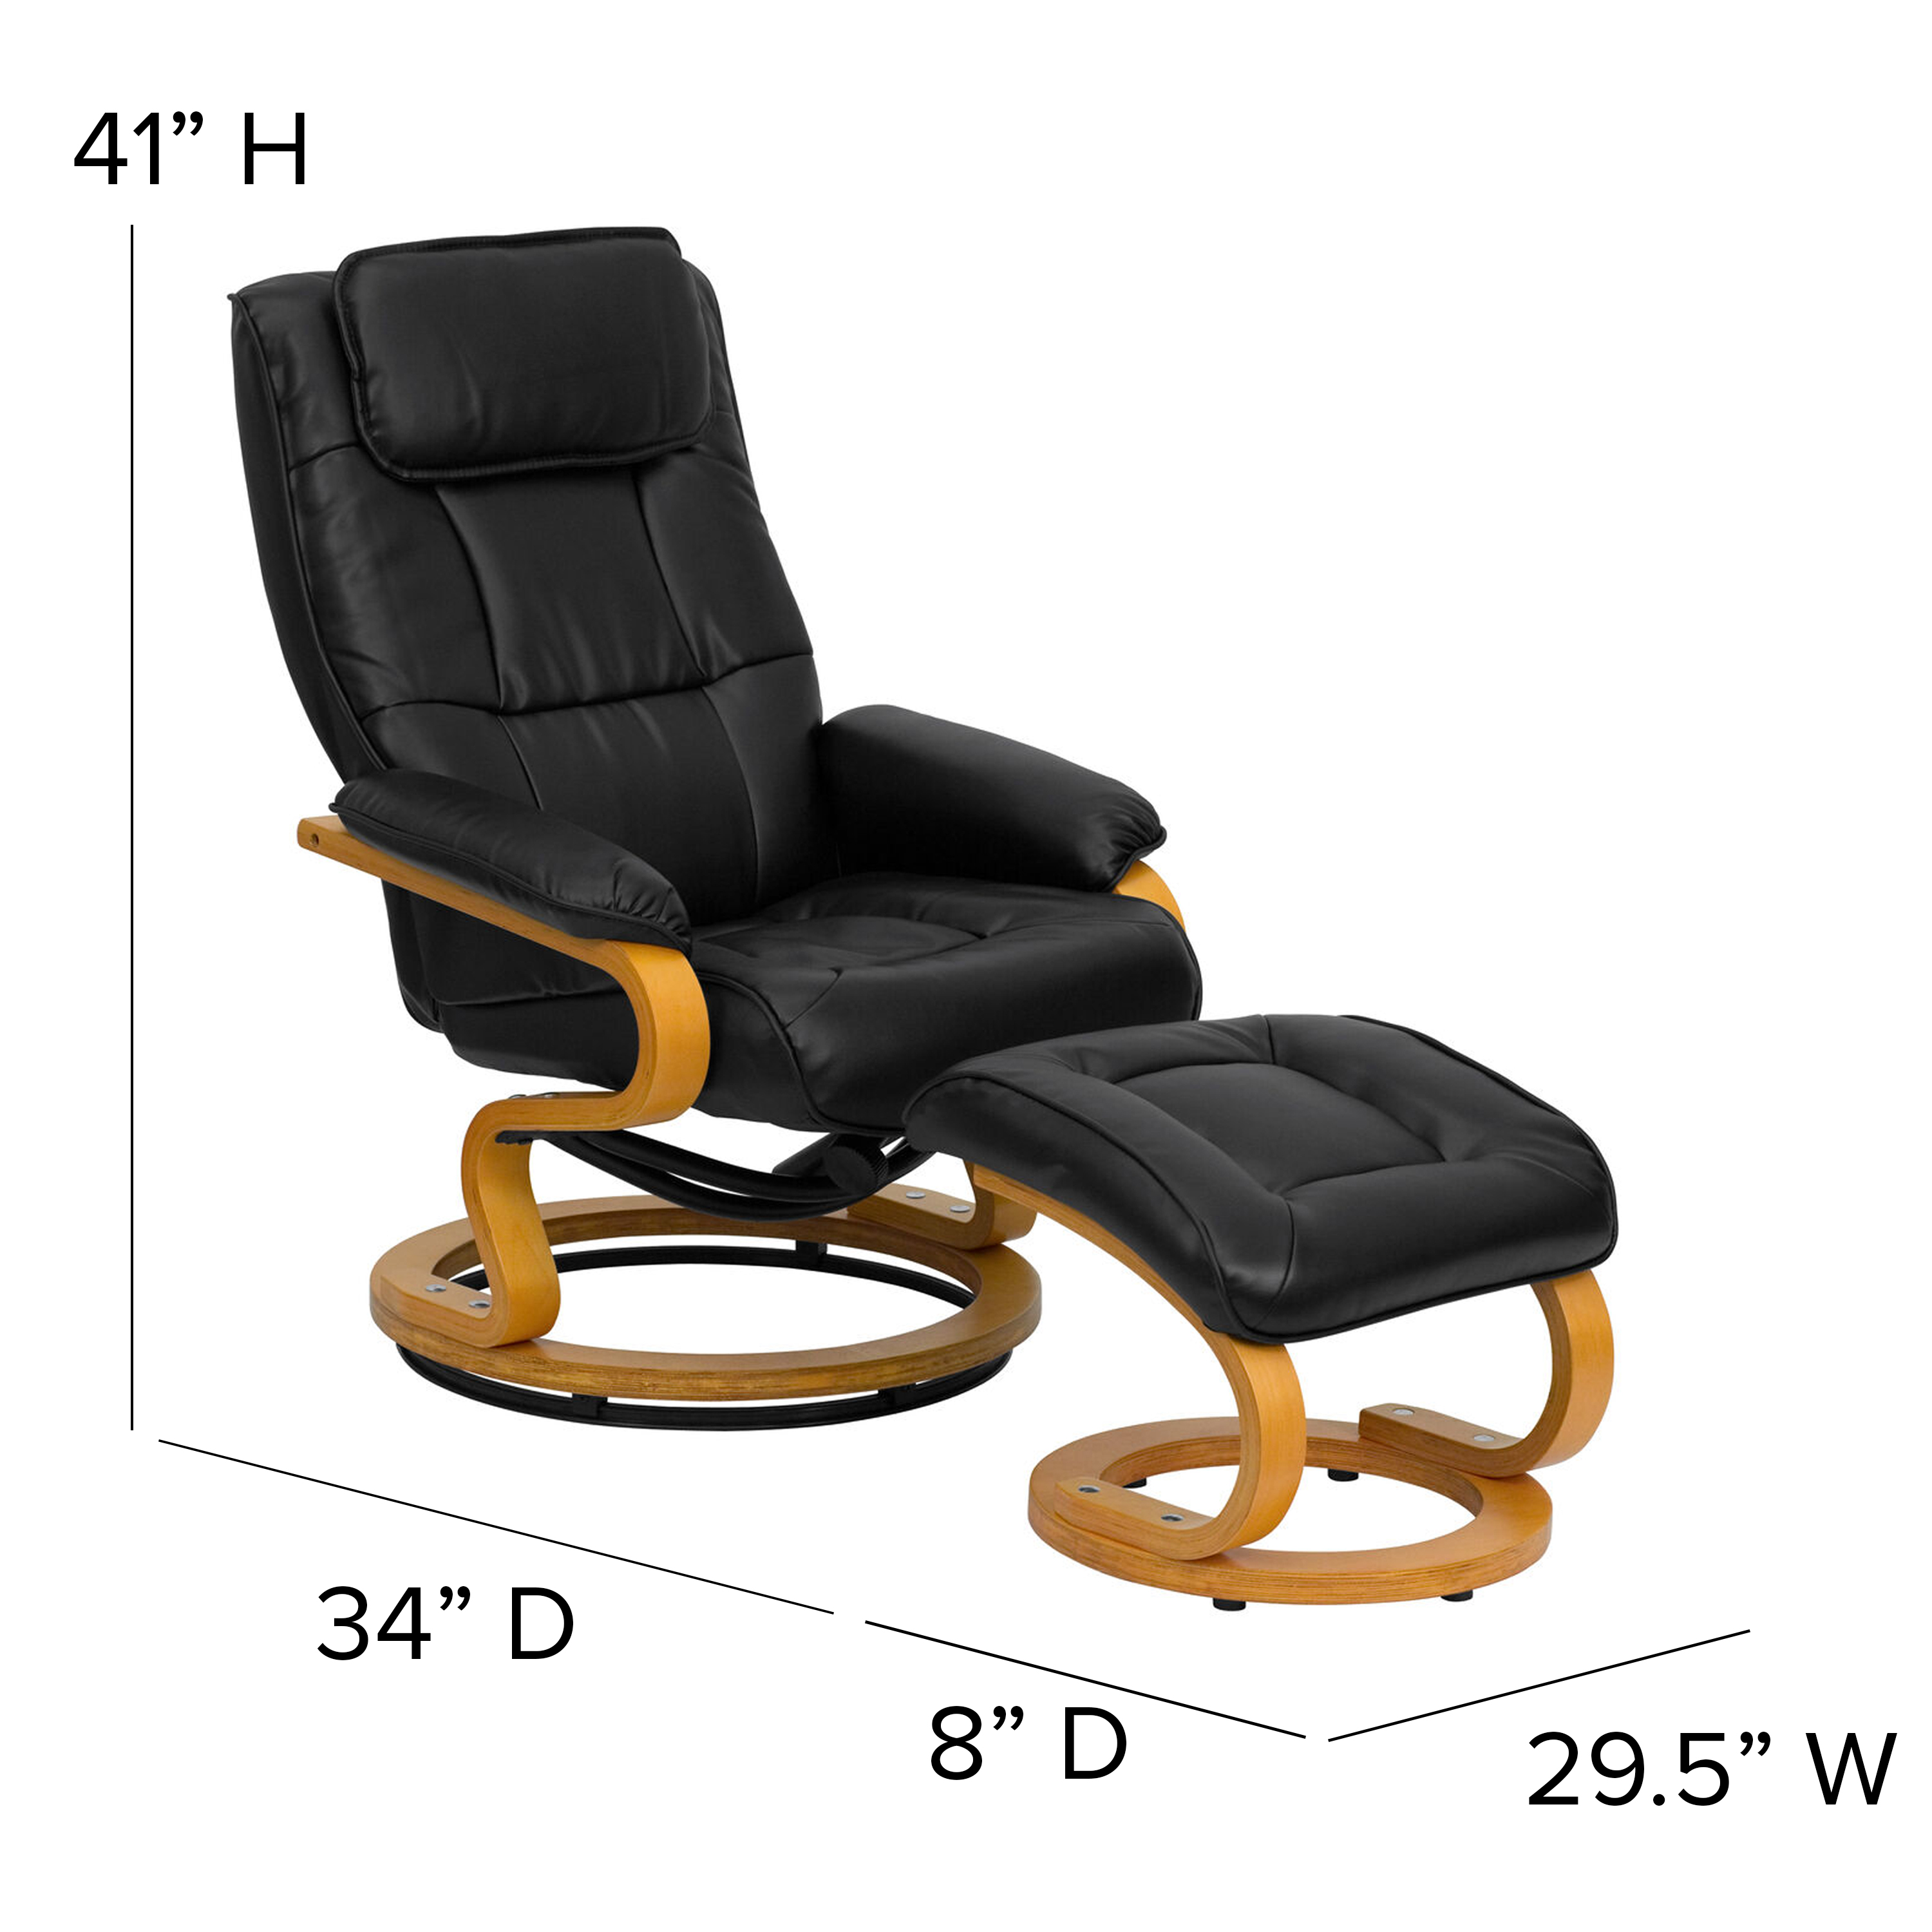 Flash Furniture Contemporary Adjustable Recliner and Ottoman with Swivel Maple Wood Base in Black LeatherSoft - image 3 of 11